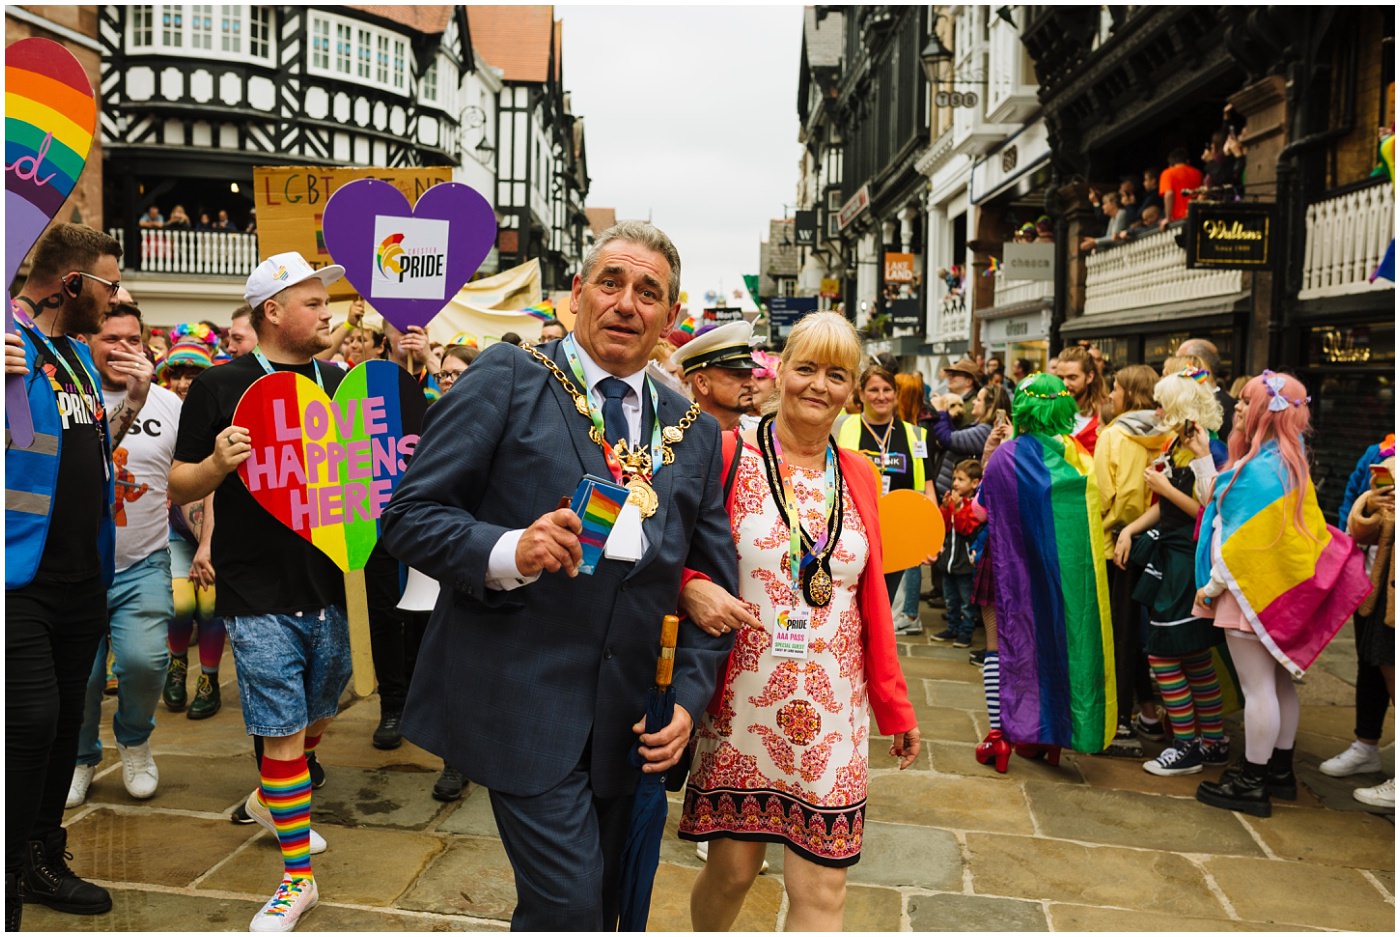 Mayor of Chester celebrates Pride 2019 and joins in the parade